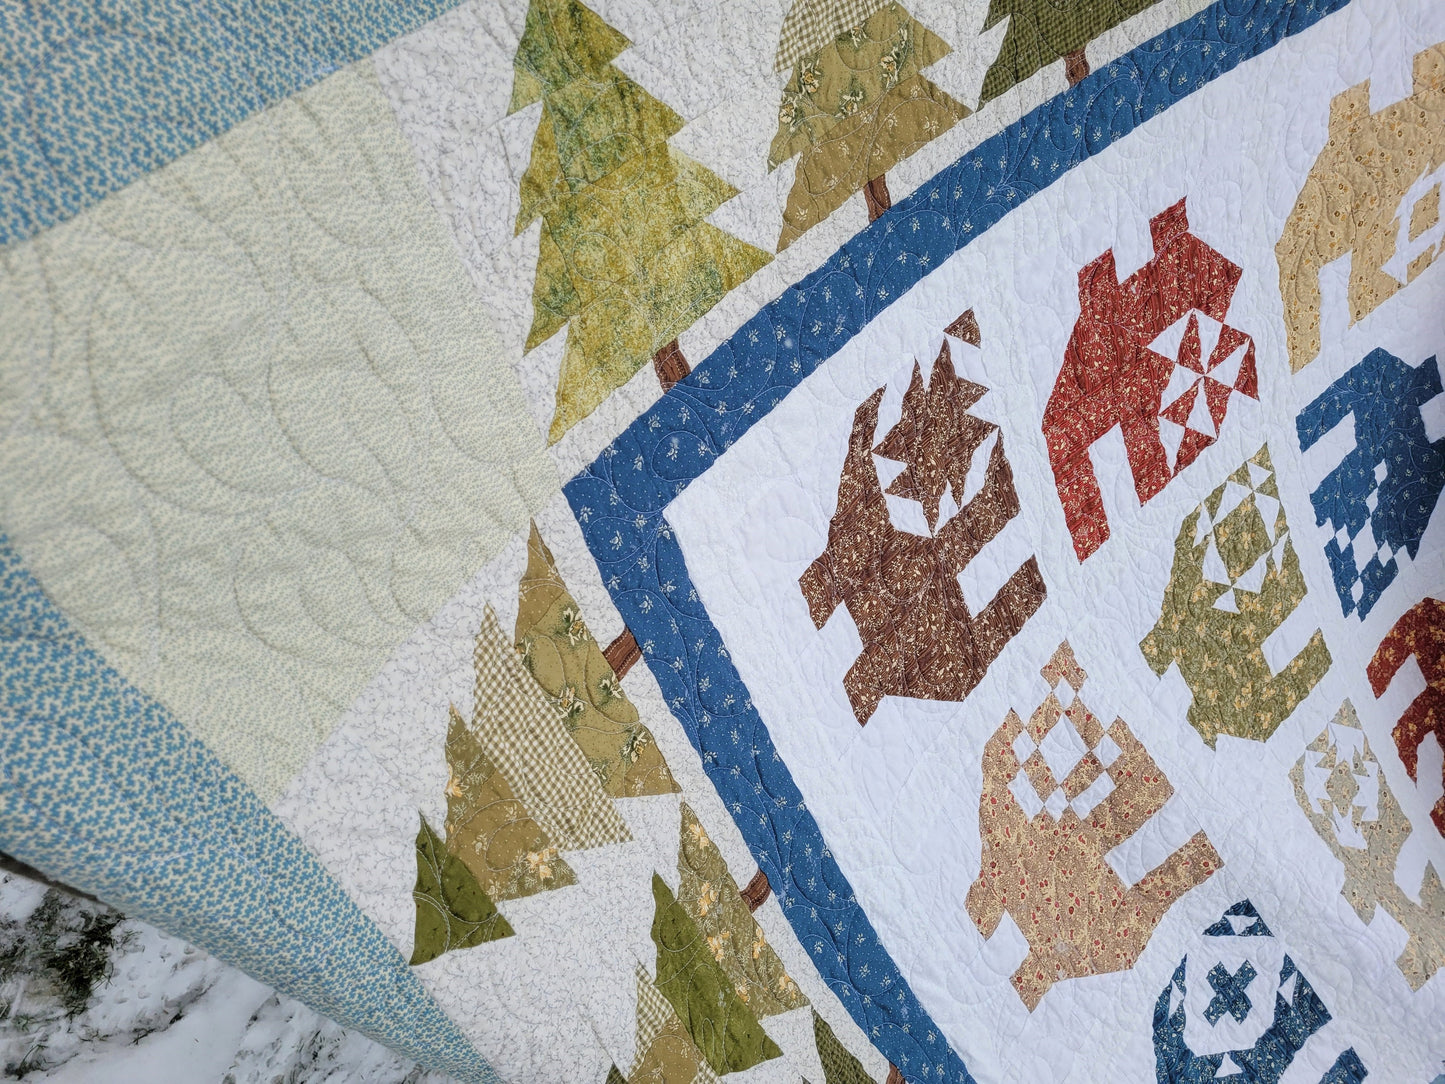 Scrappy Patchwork Village Throw Quilt with Trees and Soft Flannel Back, Sampler Block Houses